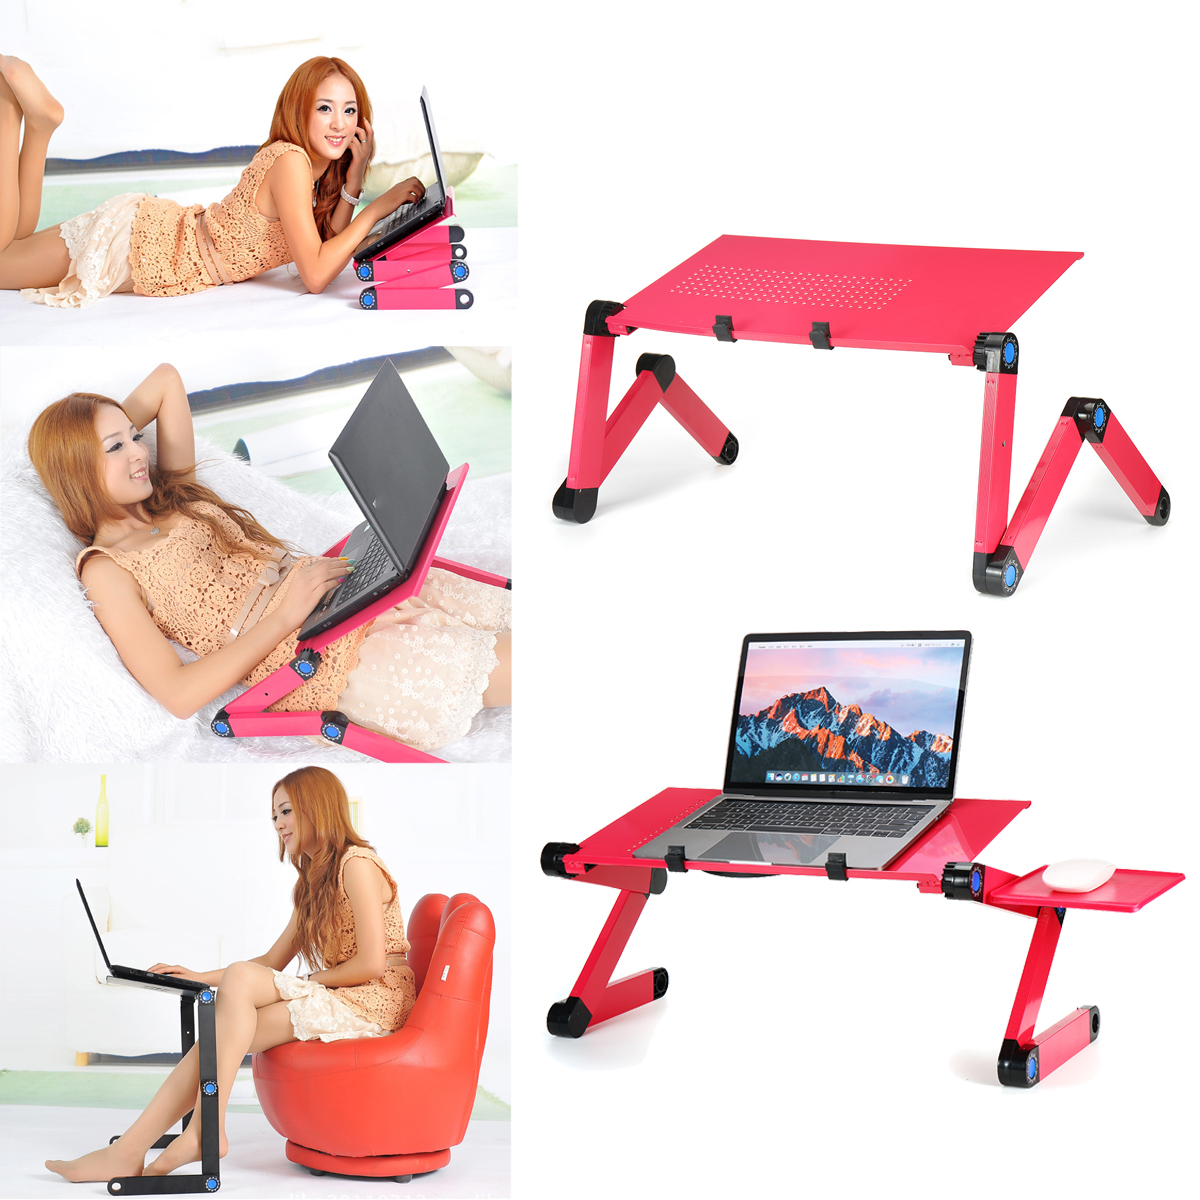 Adjustable-Laptop-Stand-Desk-Notebook-Bracket-Fan-Cooling-Pad-Game-Notebook-Base-with-Mouse-Board-fo-1757095-8